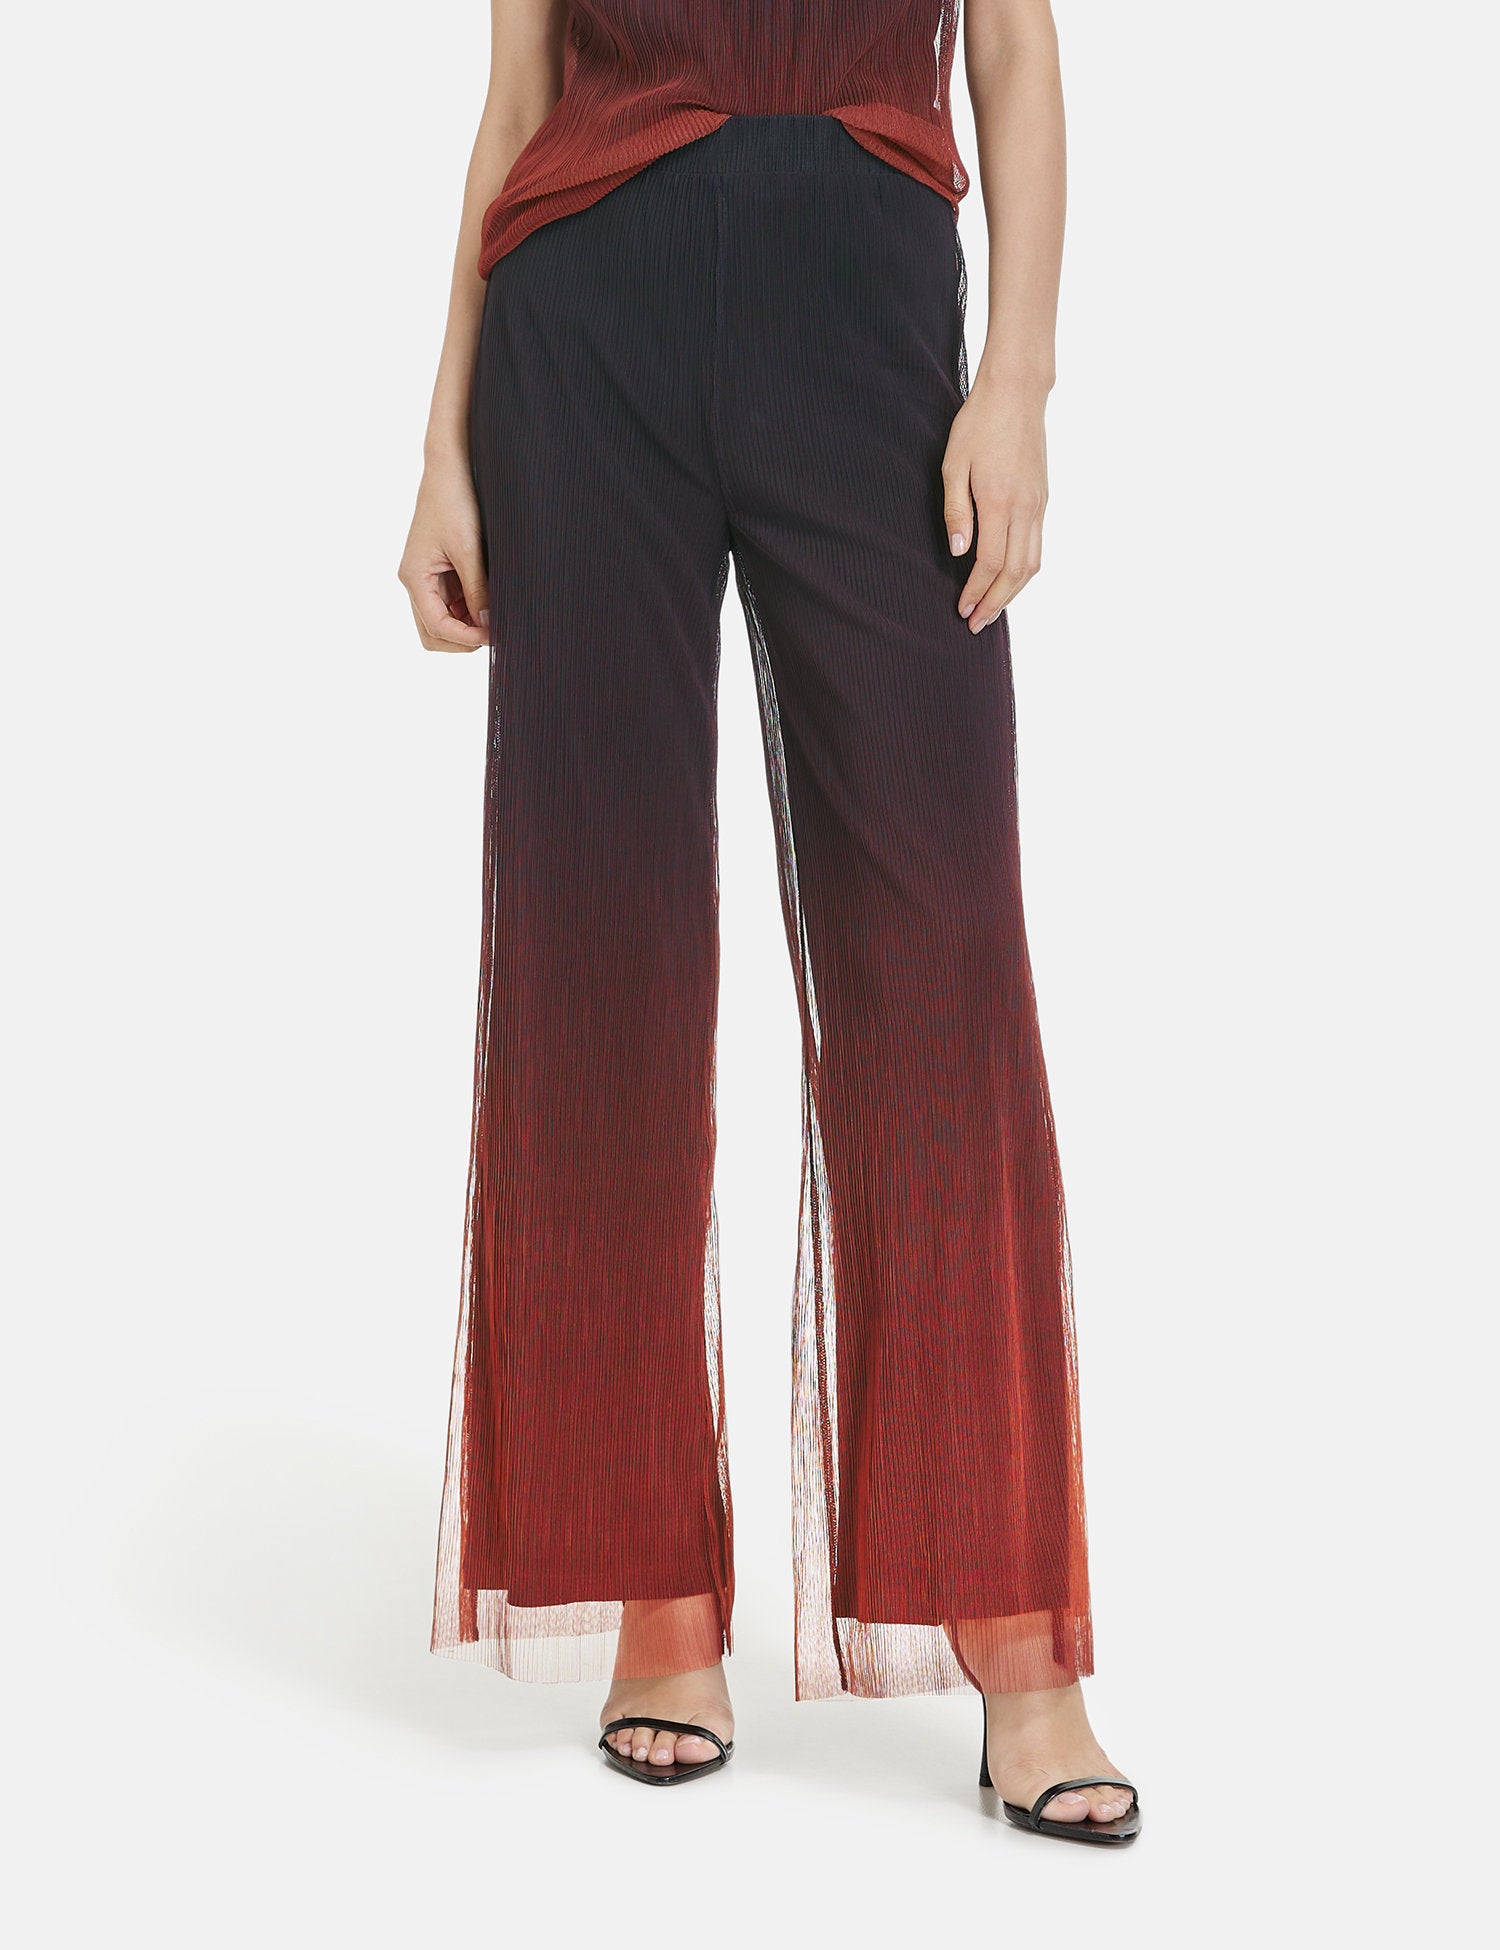 Pleated Trousers With Colour Graduation_521302-16237_1102_04